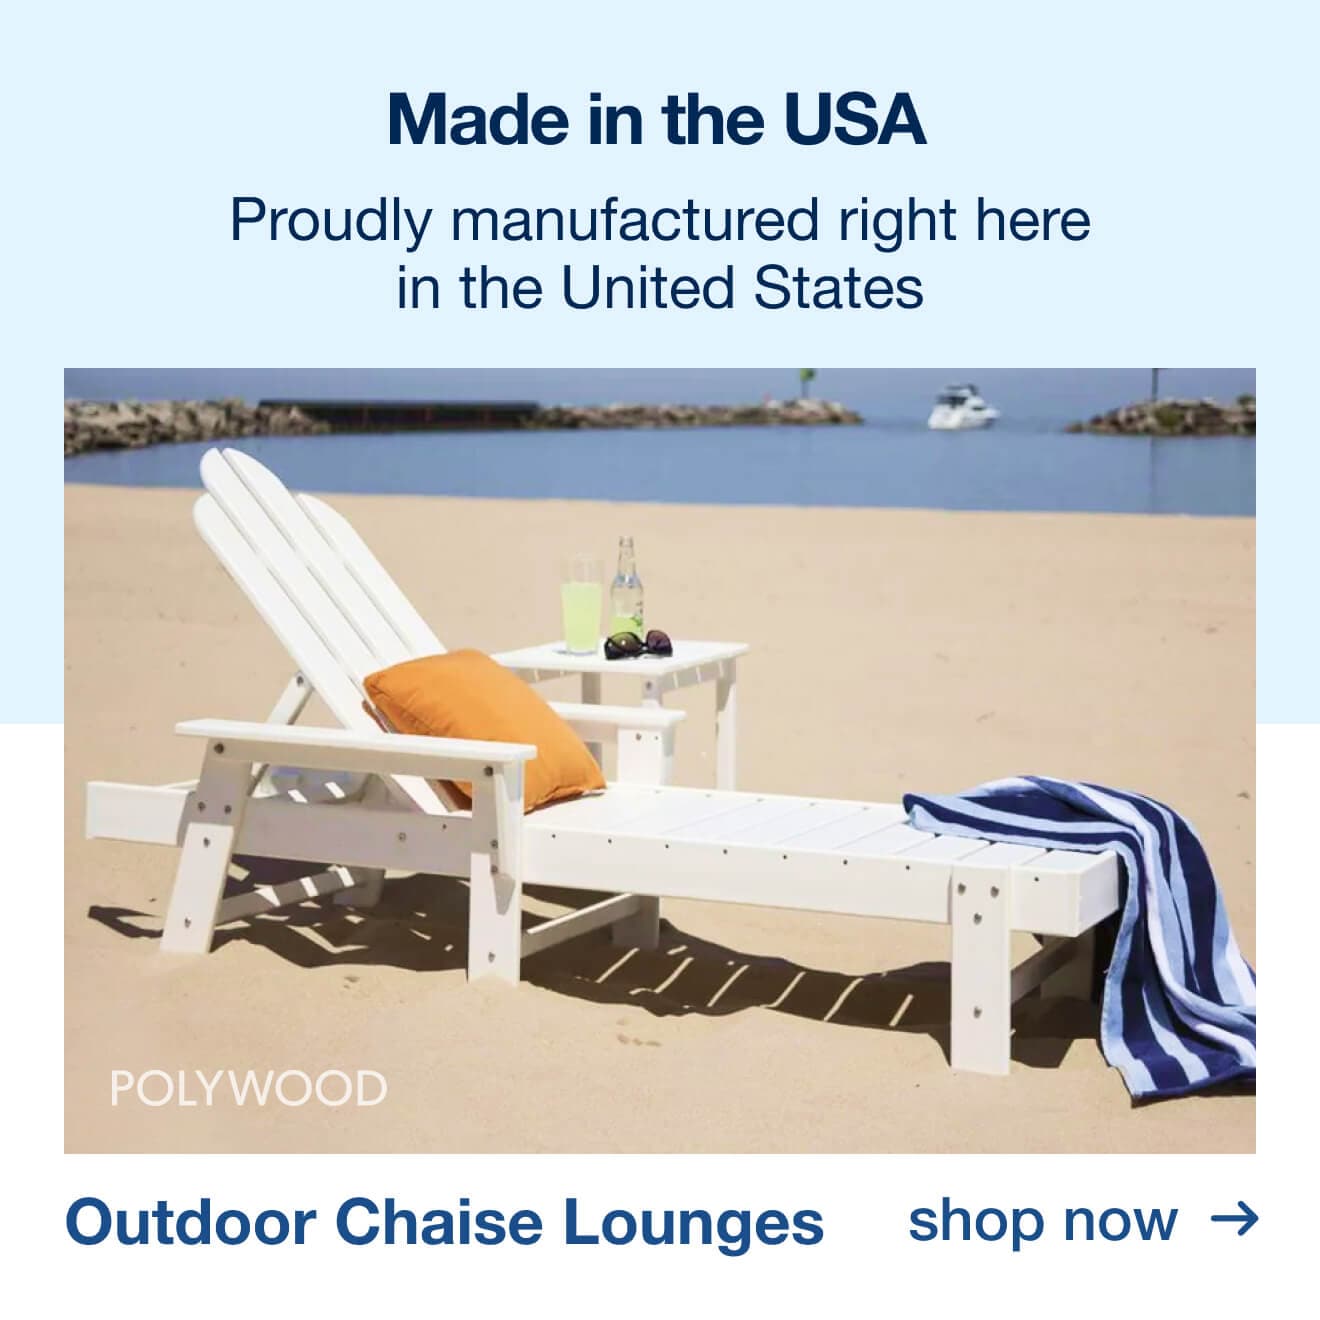 Polywood Outdoor Chaise Lounges